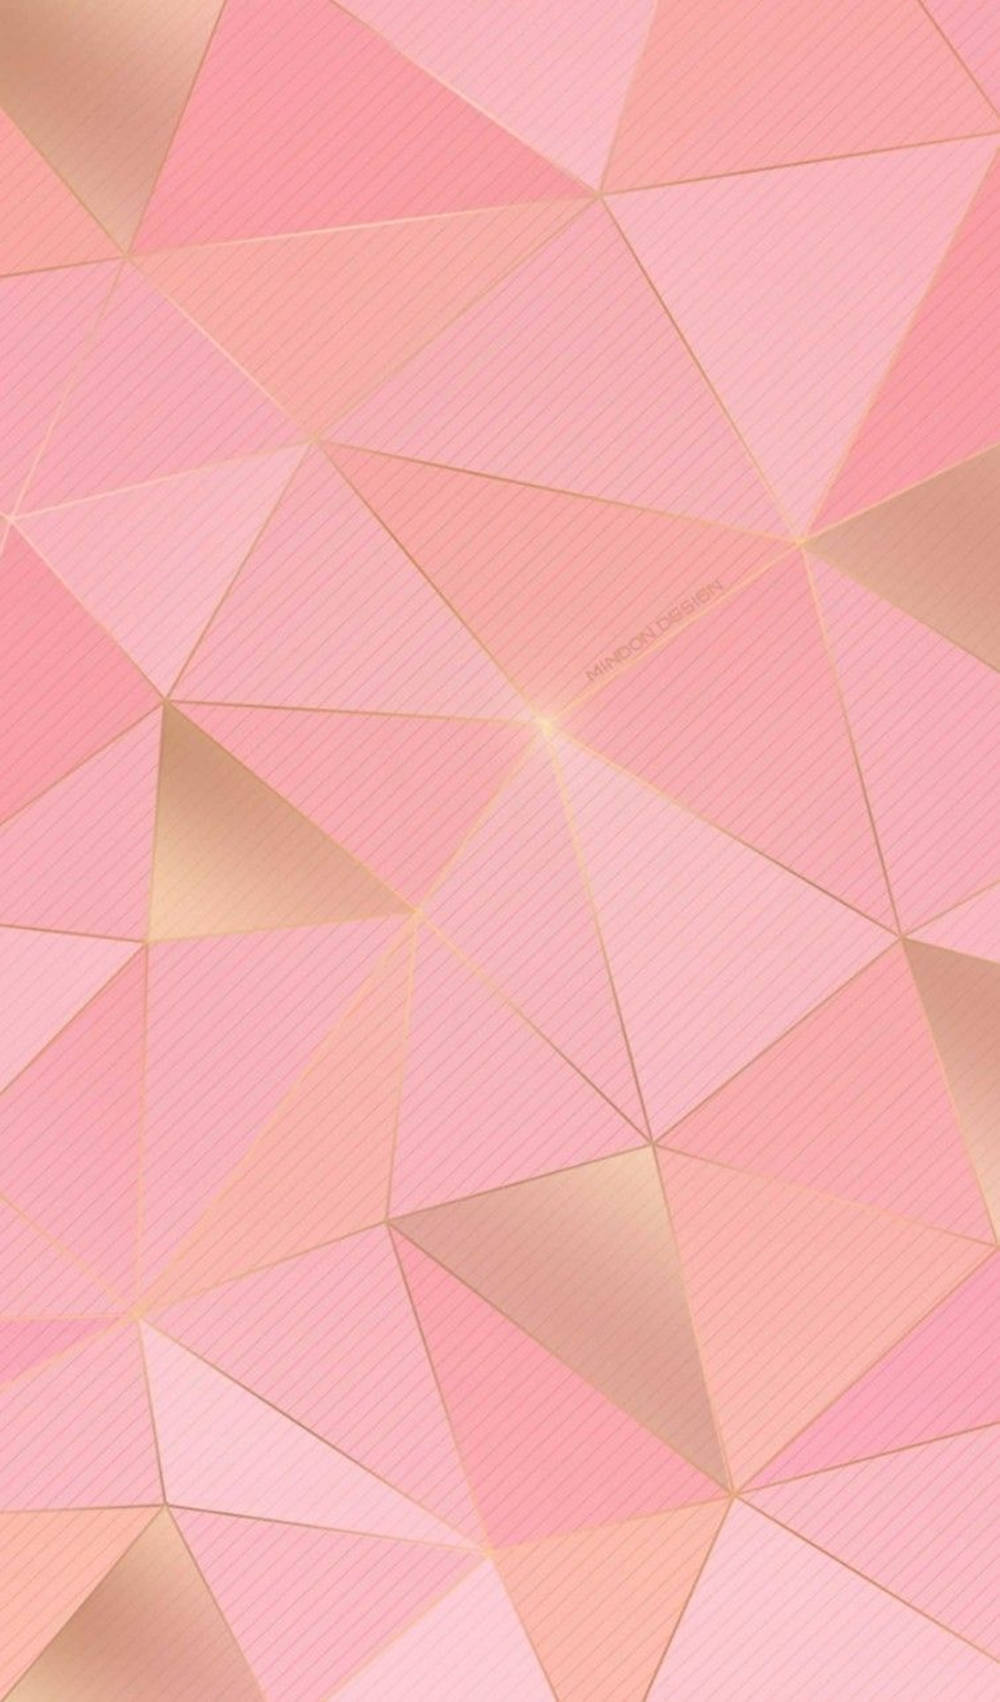 Stunning Rose Gold Ipad Displayed Amidst Intricate Geometric Triangles Background